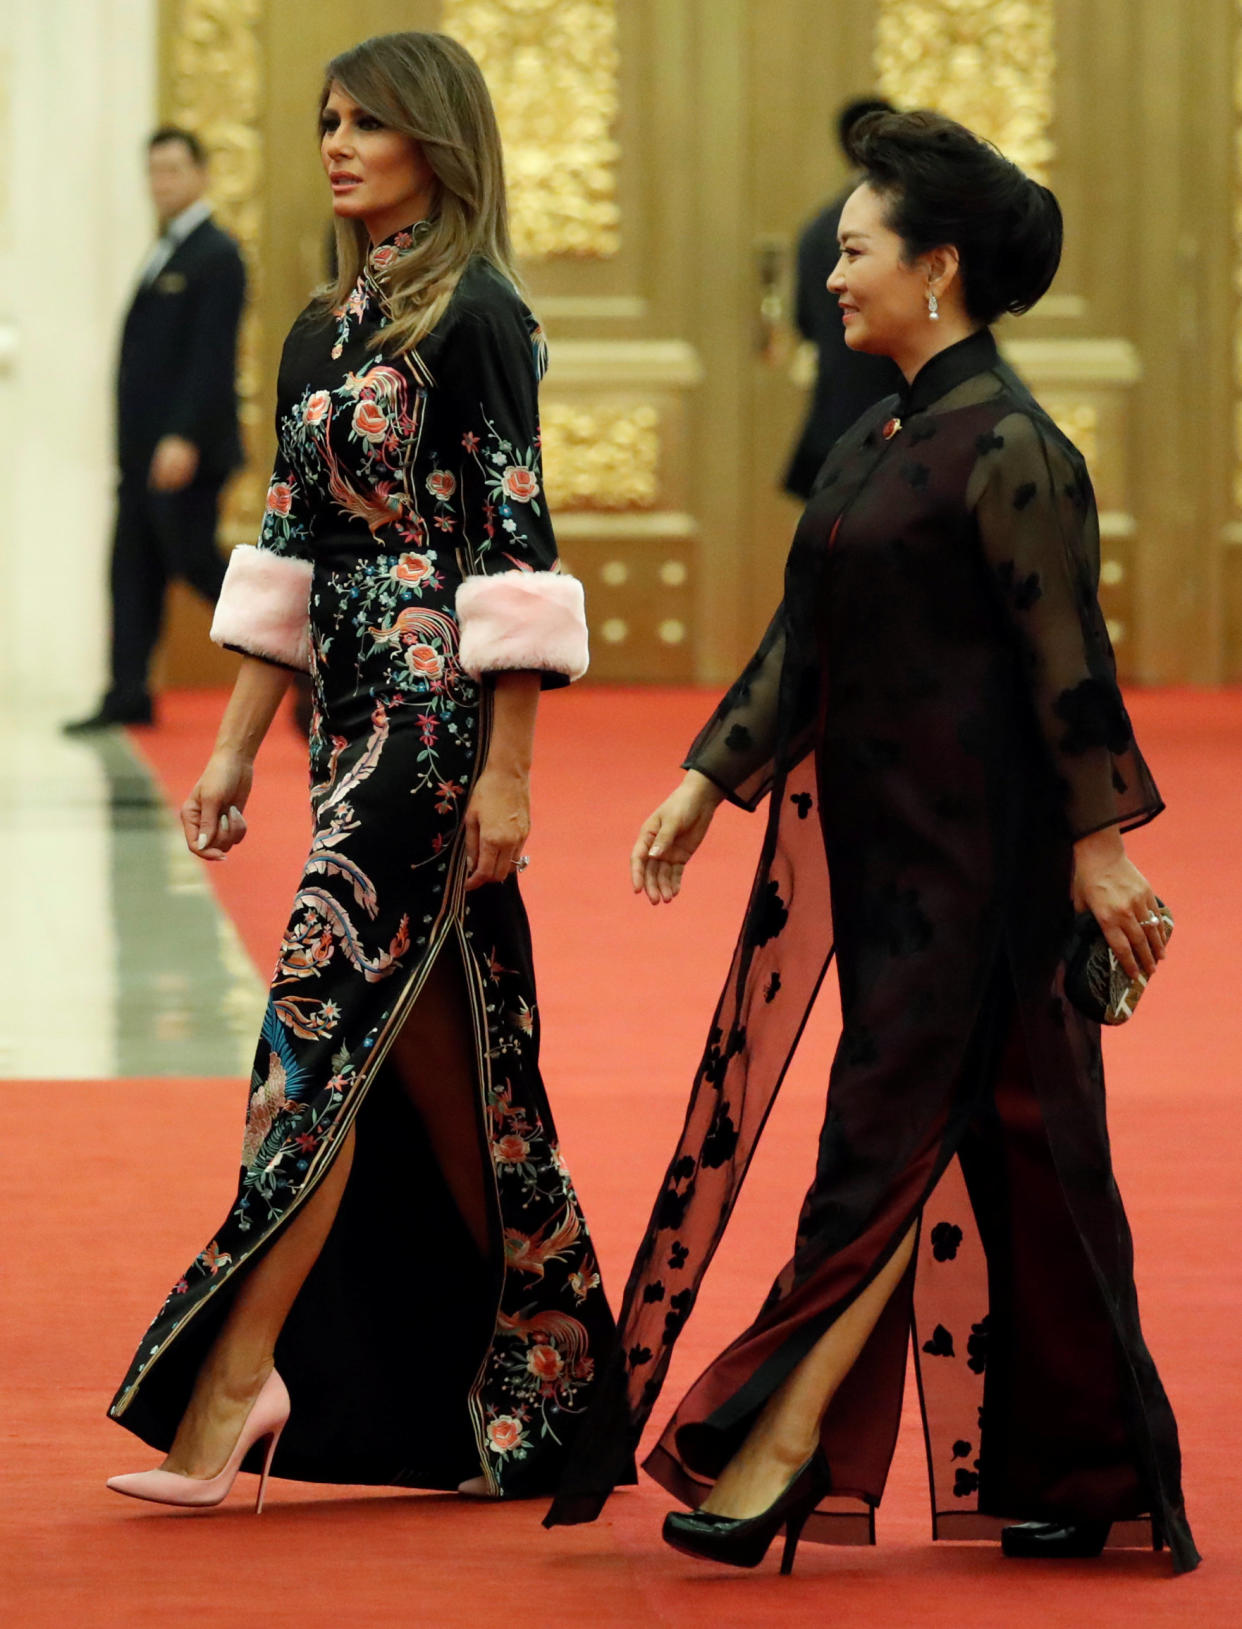 First lady Melania Trump and Peng Liyuan, wife of China’s president, Xi Jinping, arrive at a state dinner in honor of President Trump at the Great Hall of the People in Beijing on Nov. 9. (Photo: Reuters/Jonathan Ernst)